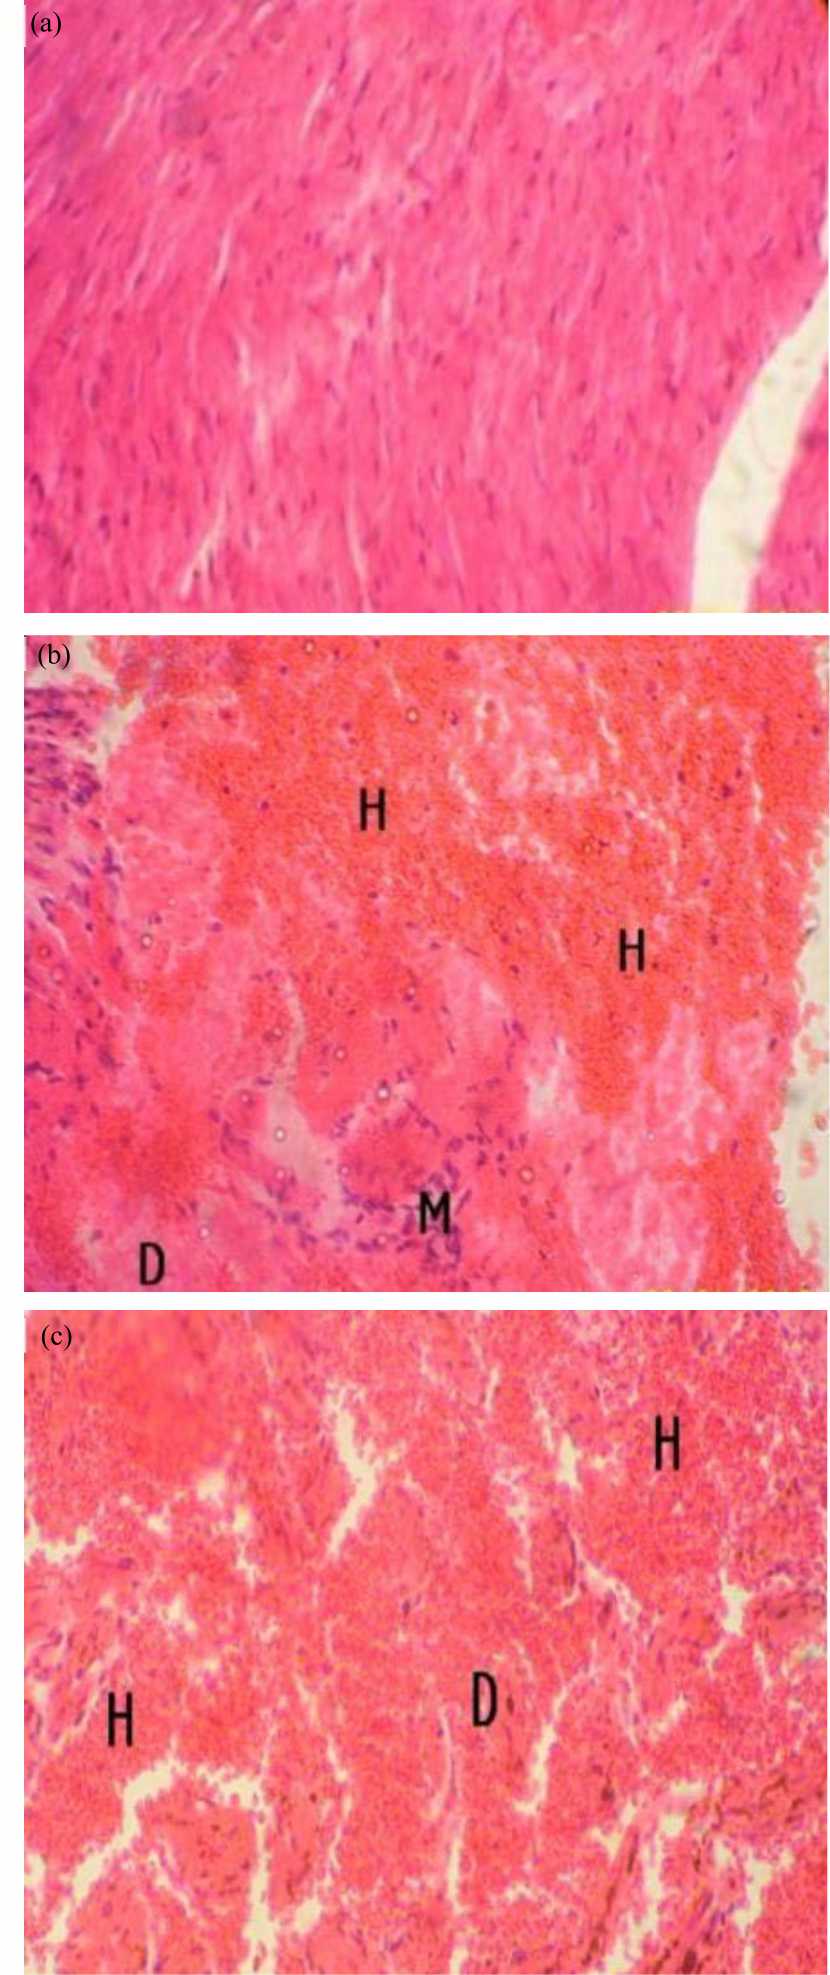 Image for - Toxicological Evaluation and Therapeutic Index of Ethanolic Leaf Extract of Acanthus montanus (Acanthaceae) in Mice